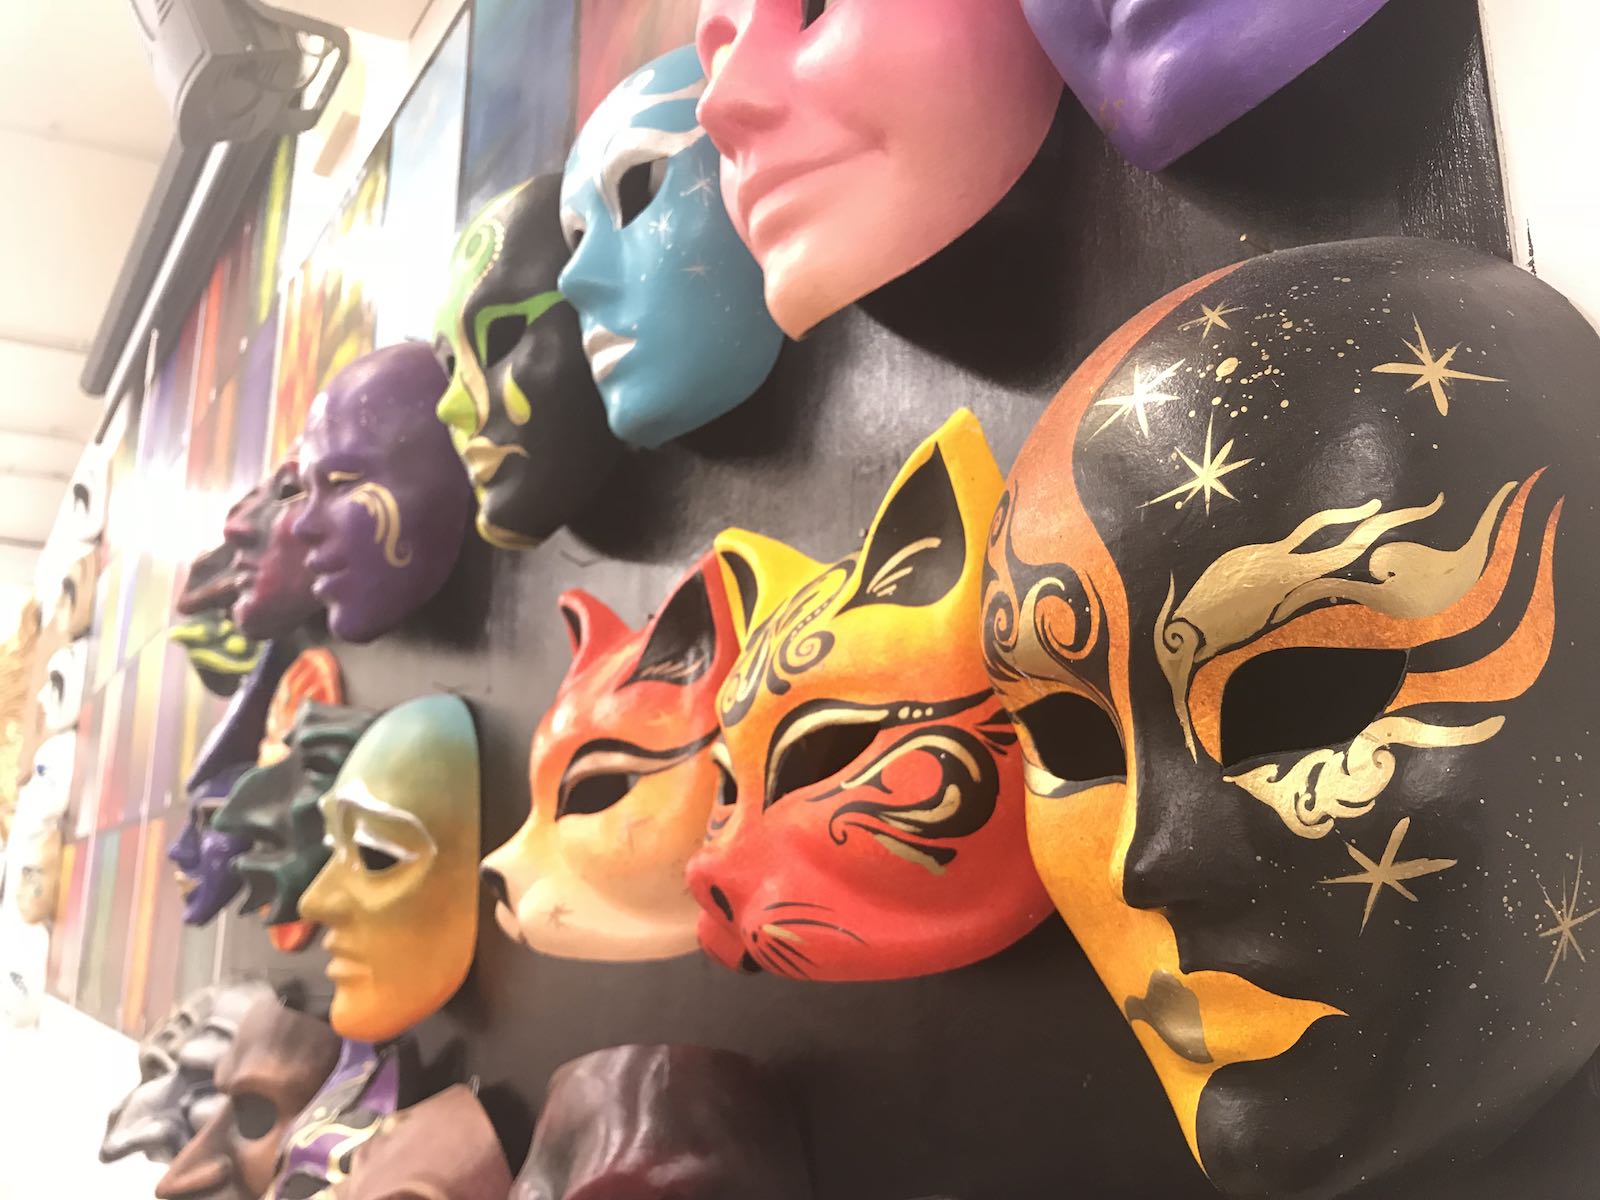 Masks on the wall at the studio